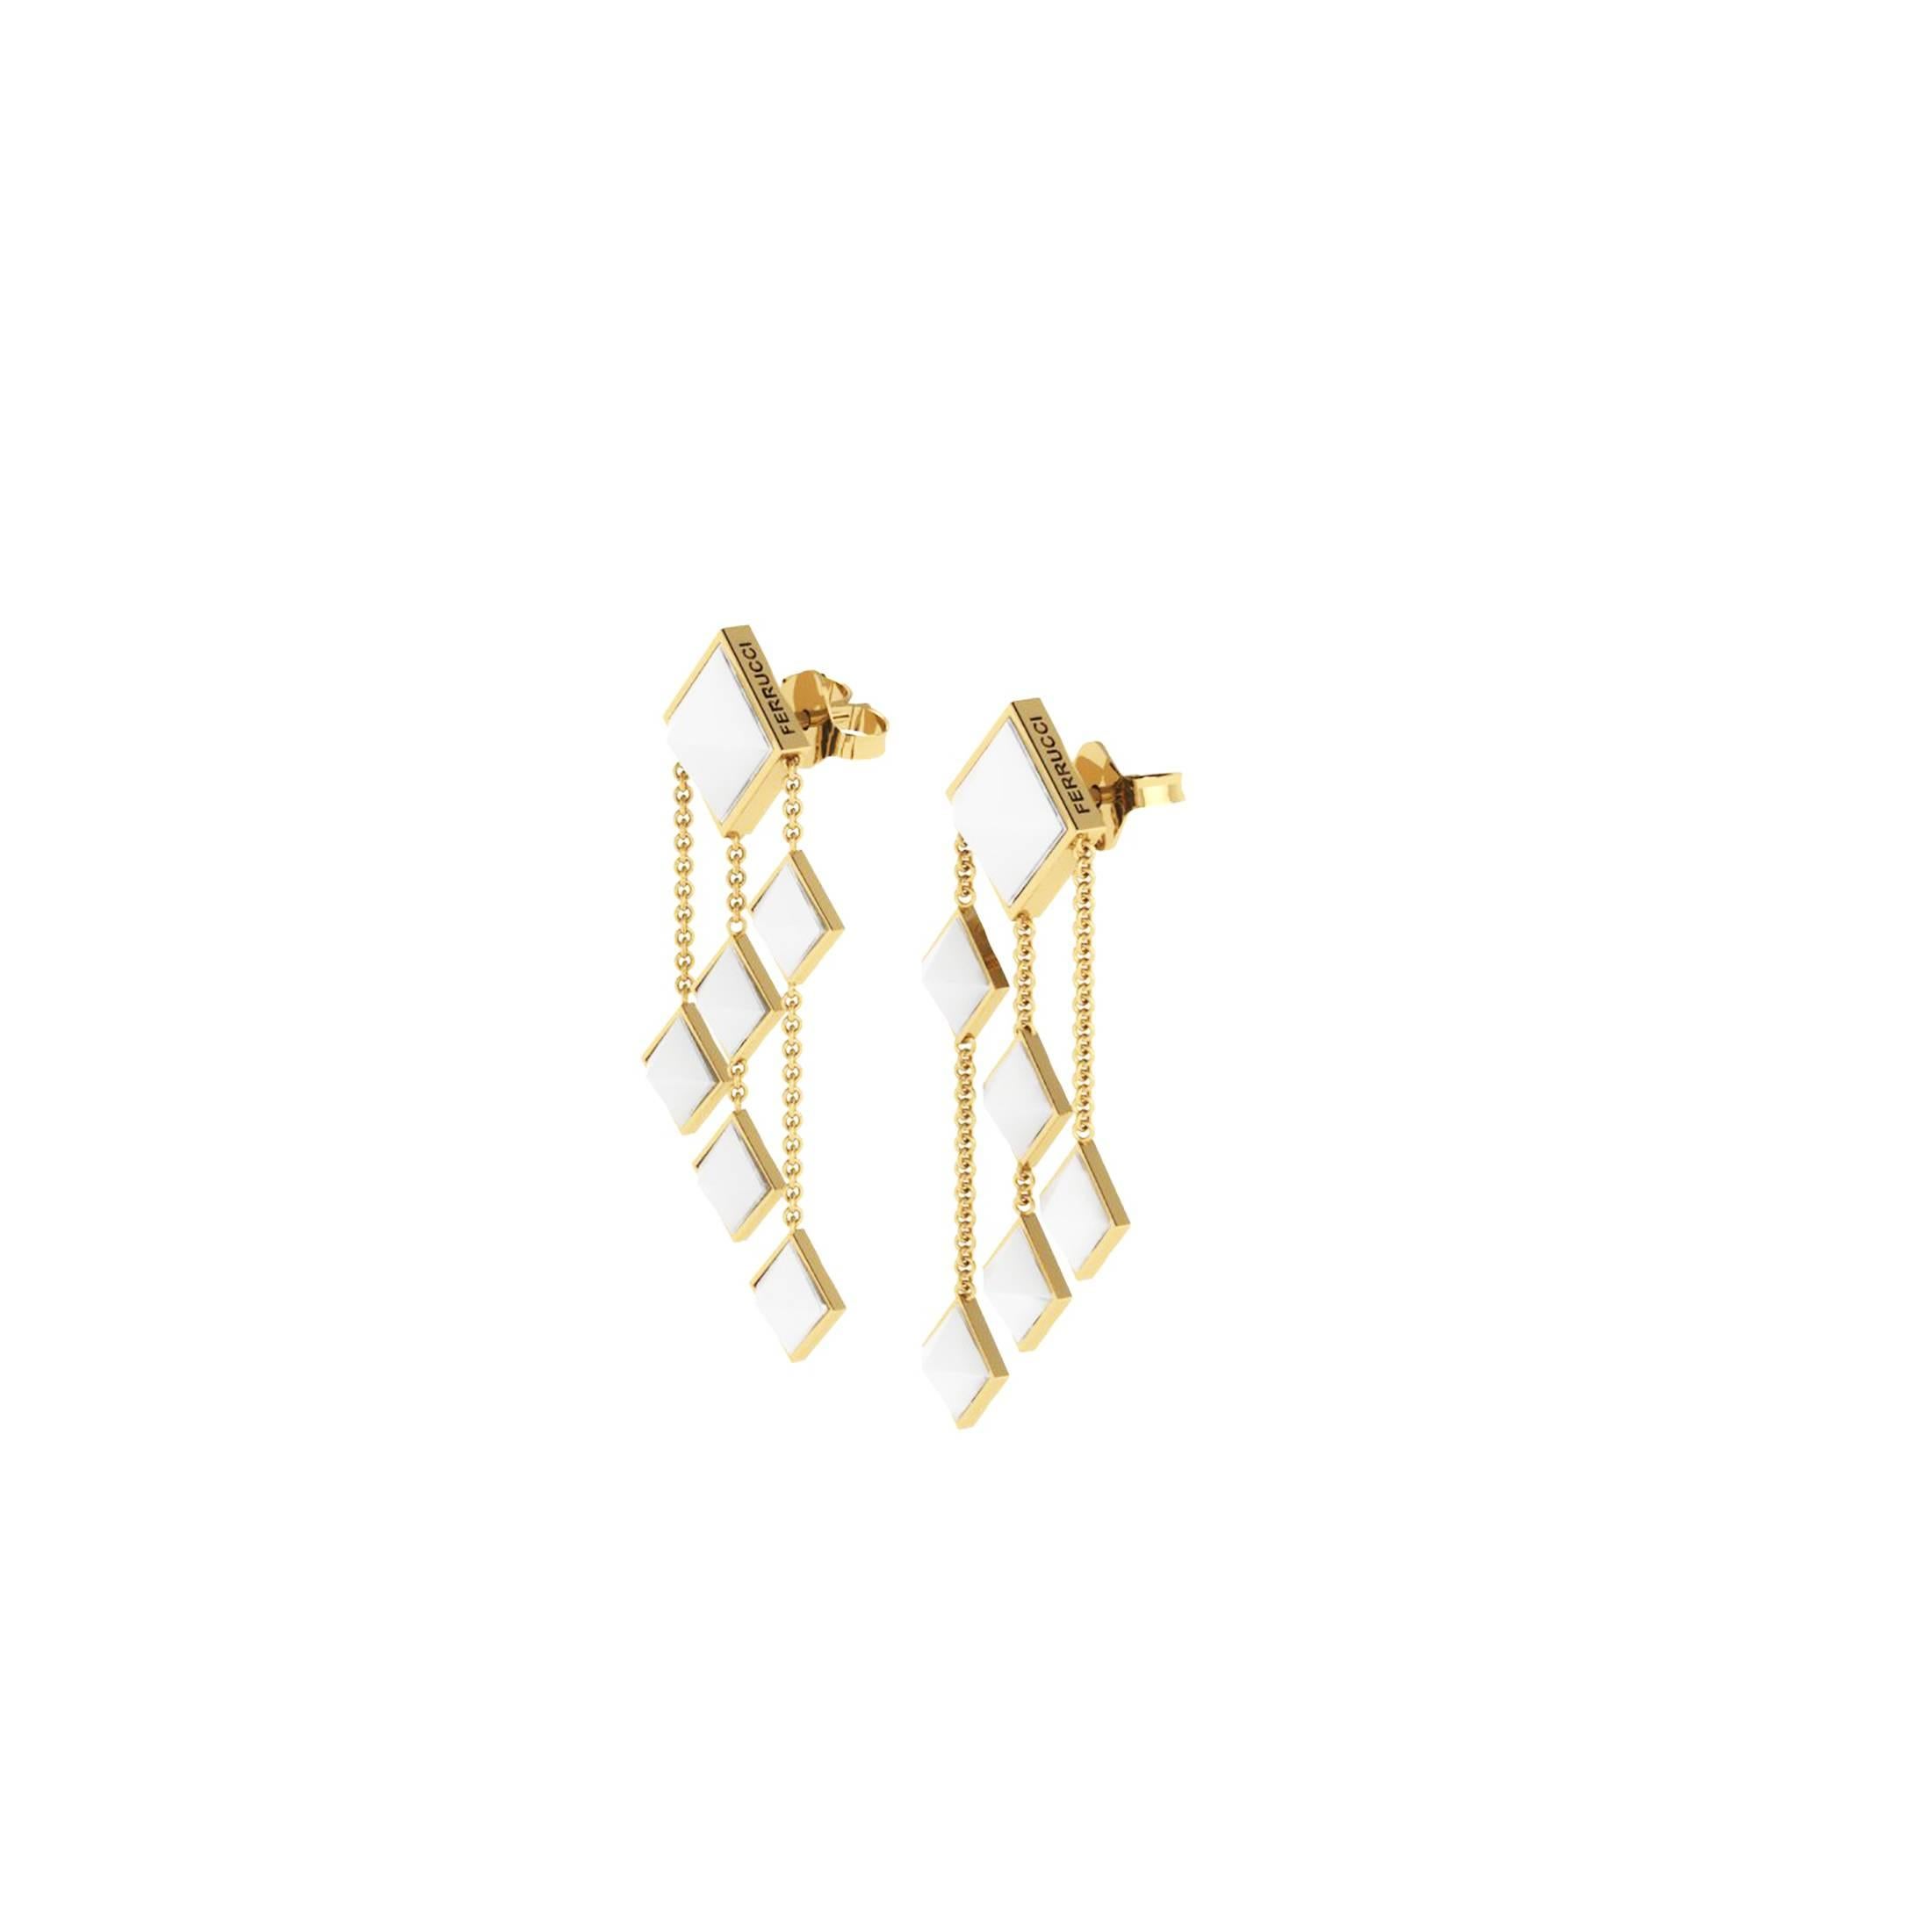 From FERRUCCI Pyramids collection, these white agate cut, set in 18k yellow gold dangling earrings, hand made in New York city by Italian master jeweler Francesco Ferrucci, an Art Deco inspire design, elegant but light for every occasion, easy to